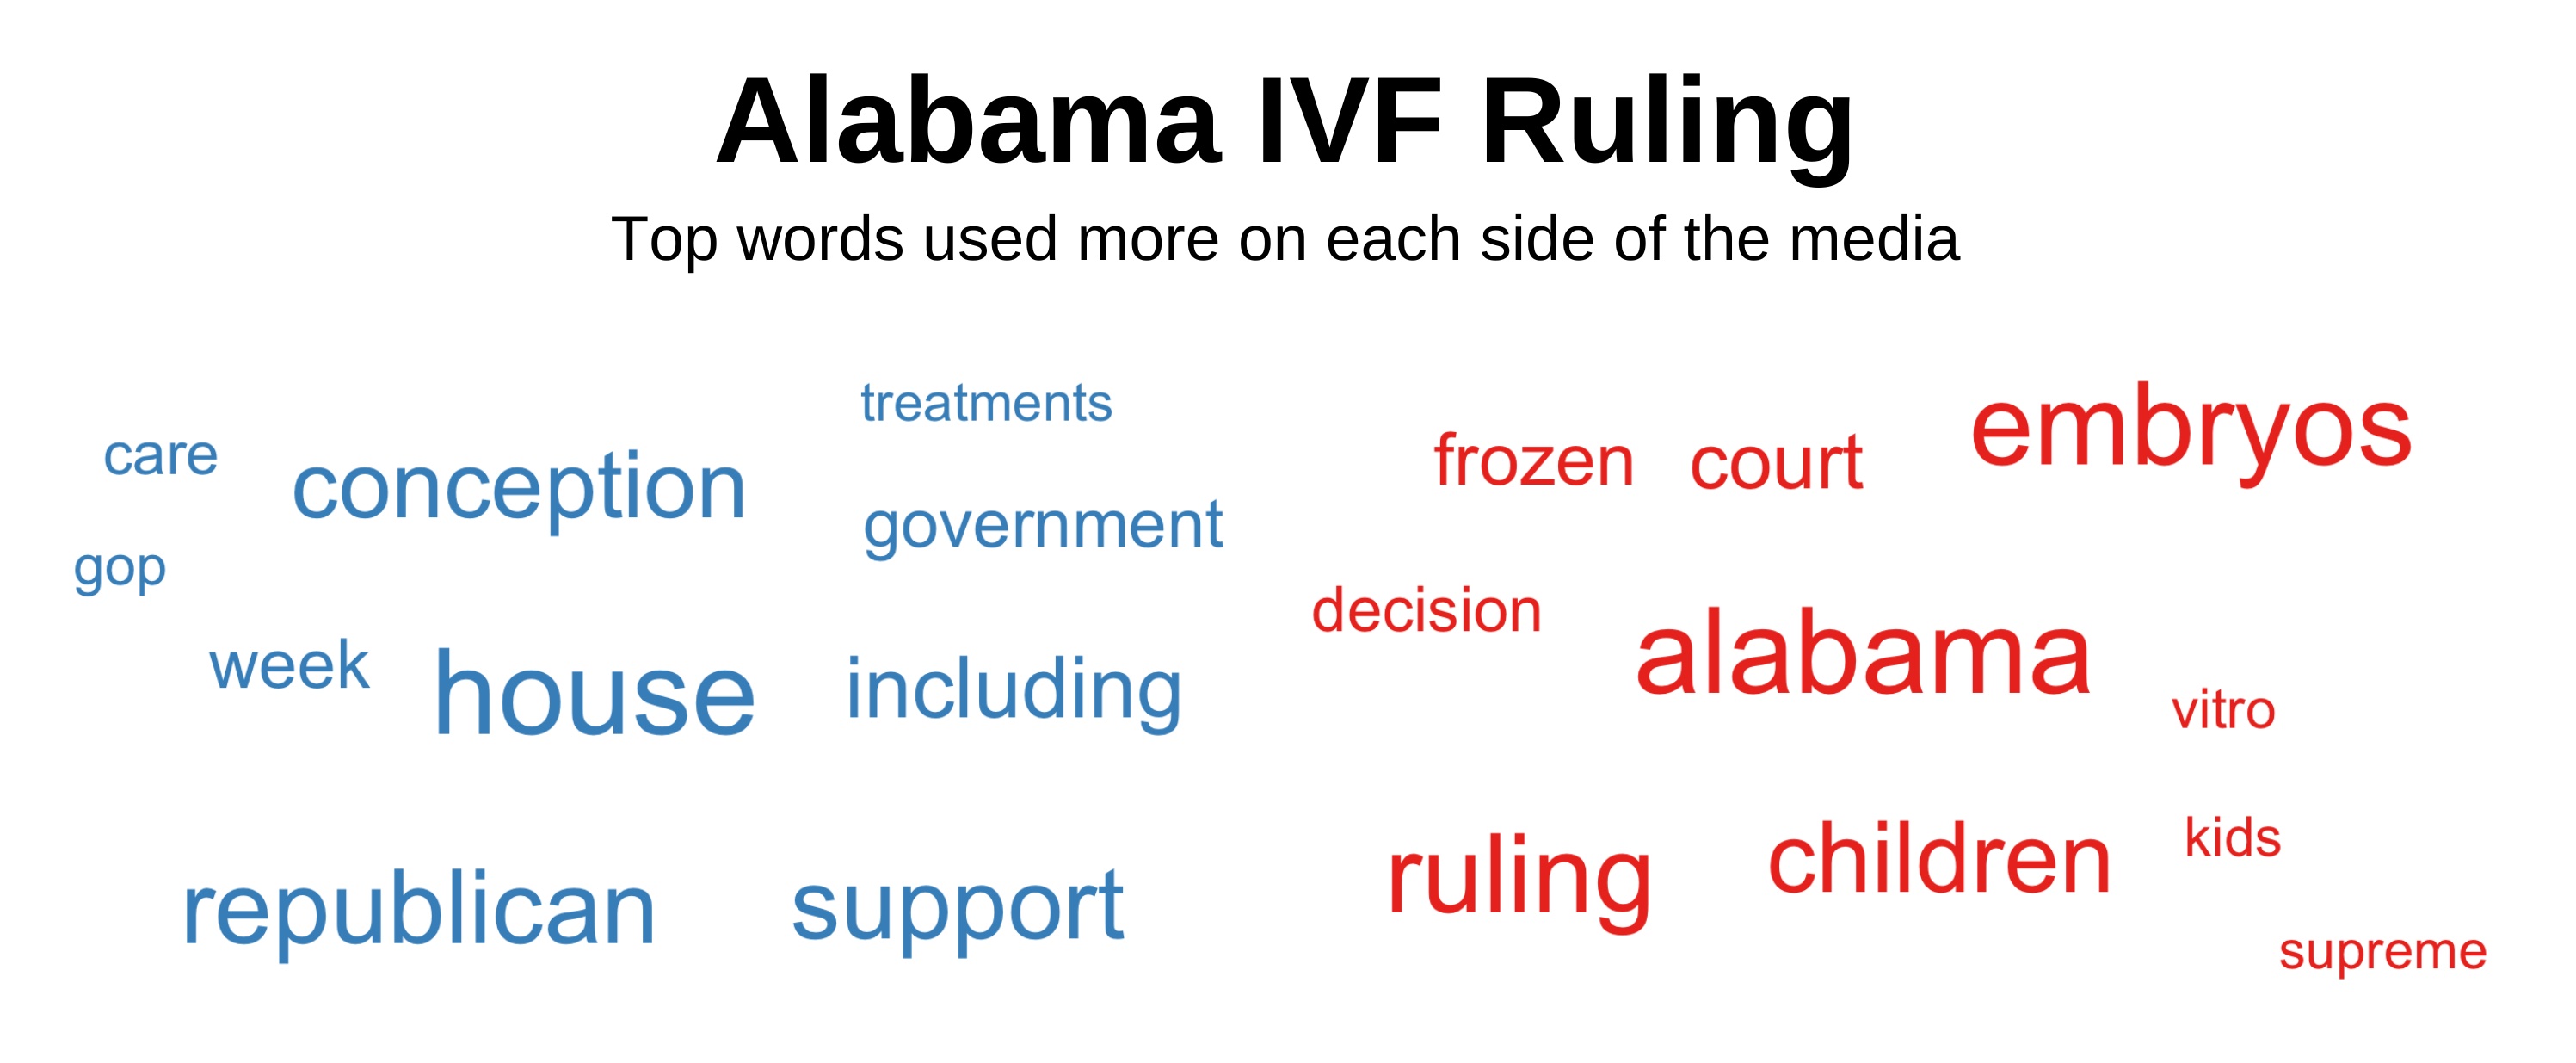 Top words about IVF used more on each side of the media.